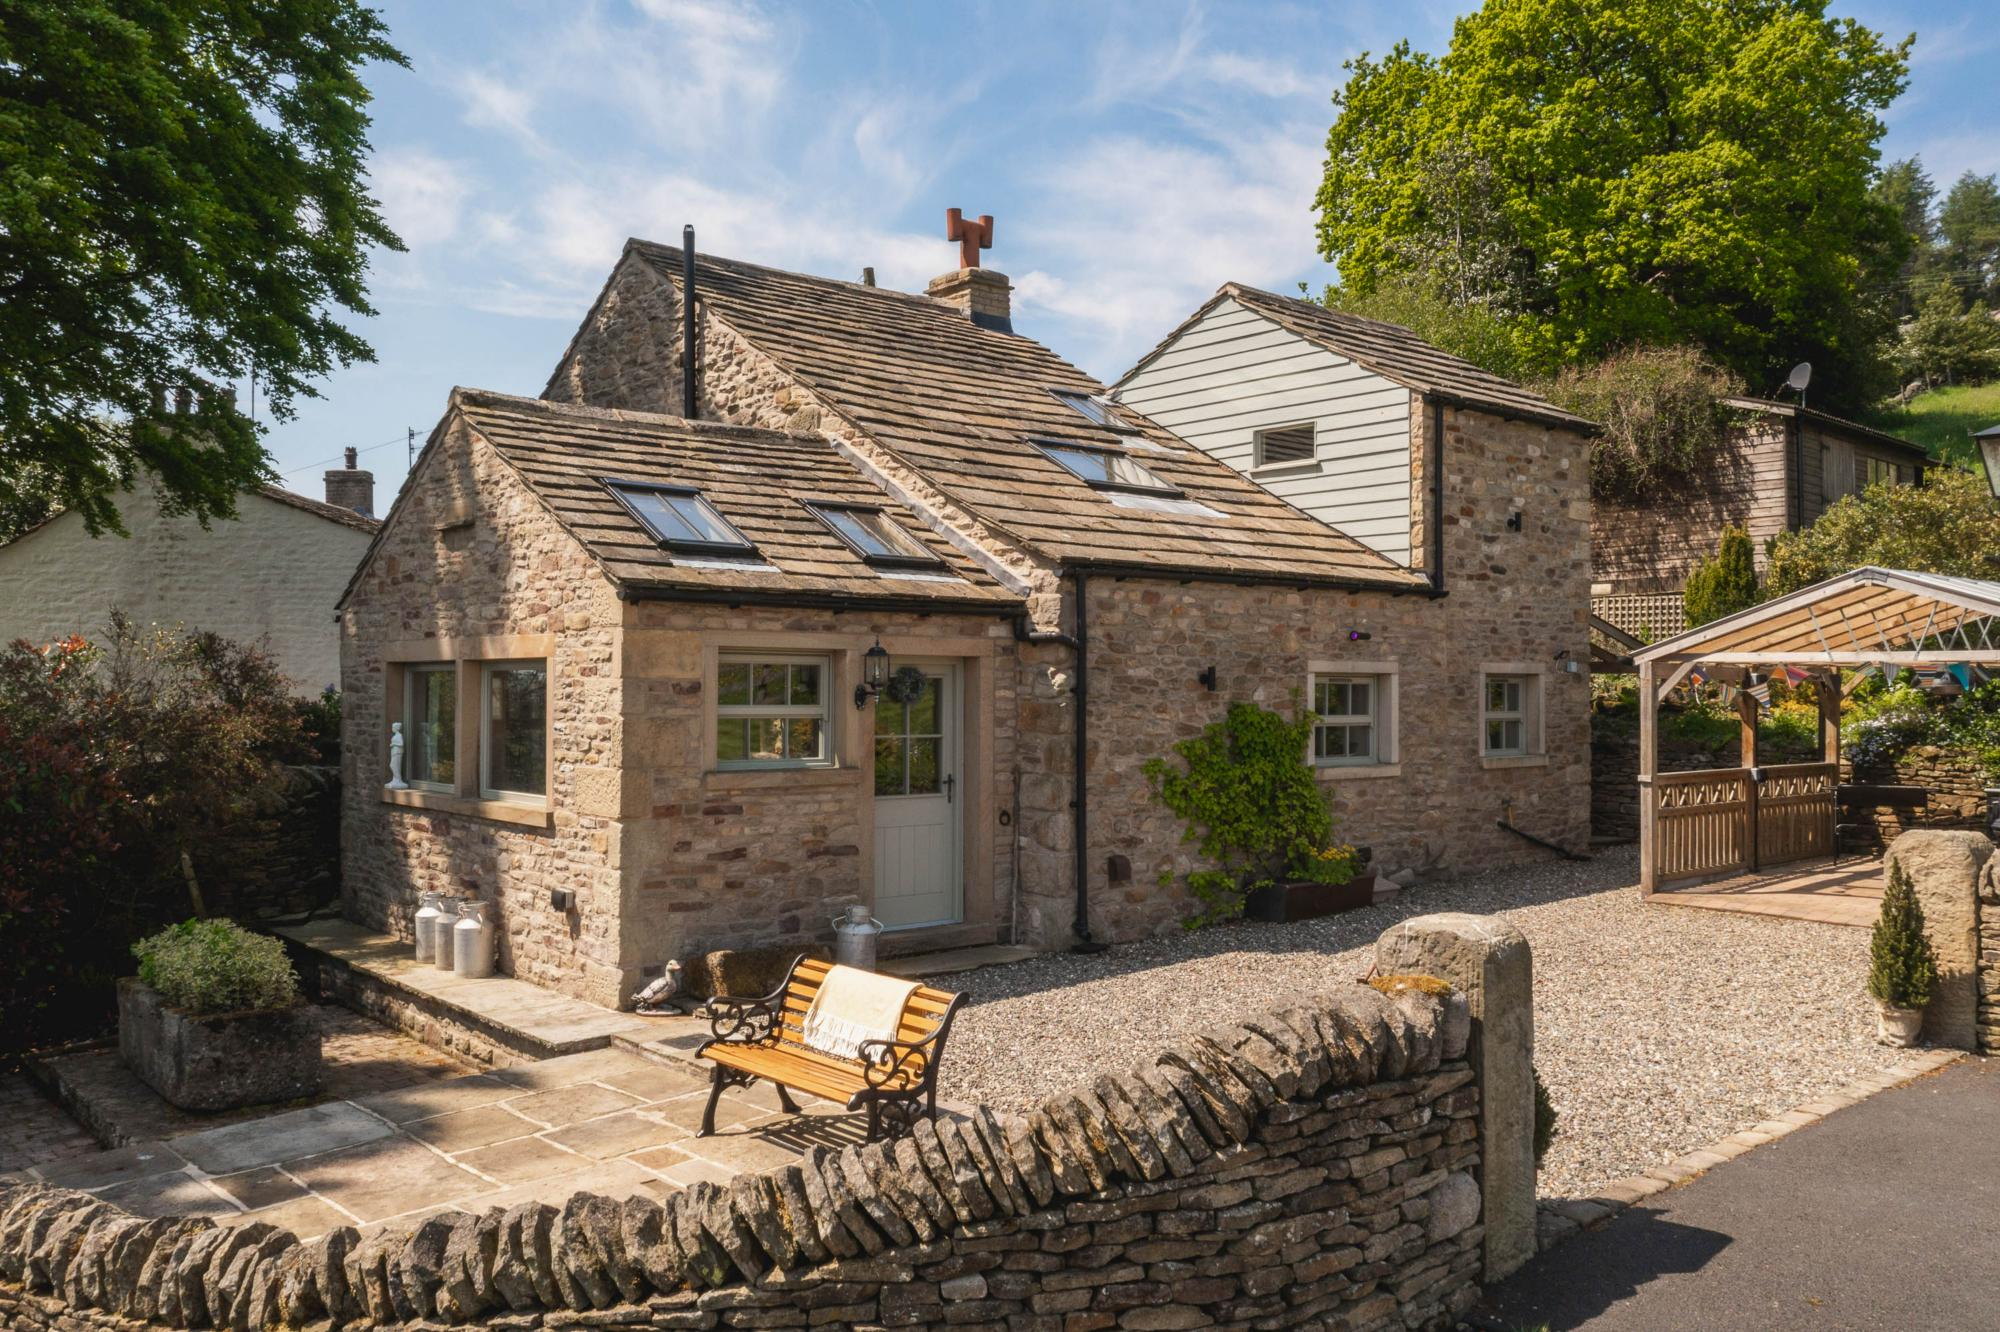 Self-Catering in Skipton holidays at Cool Places